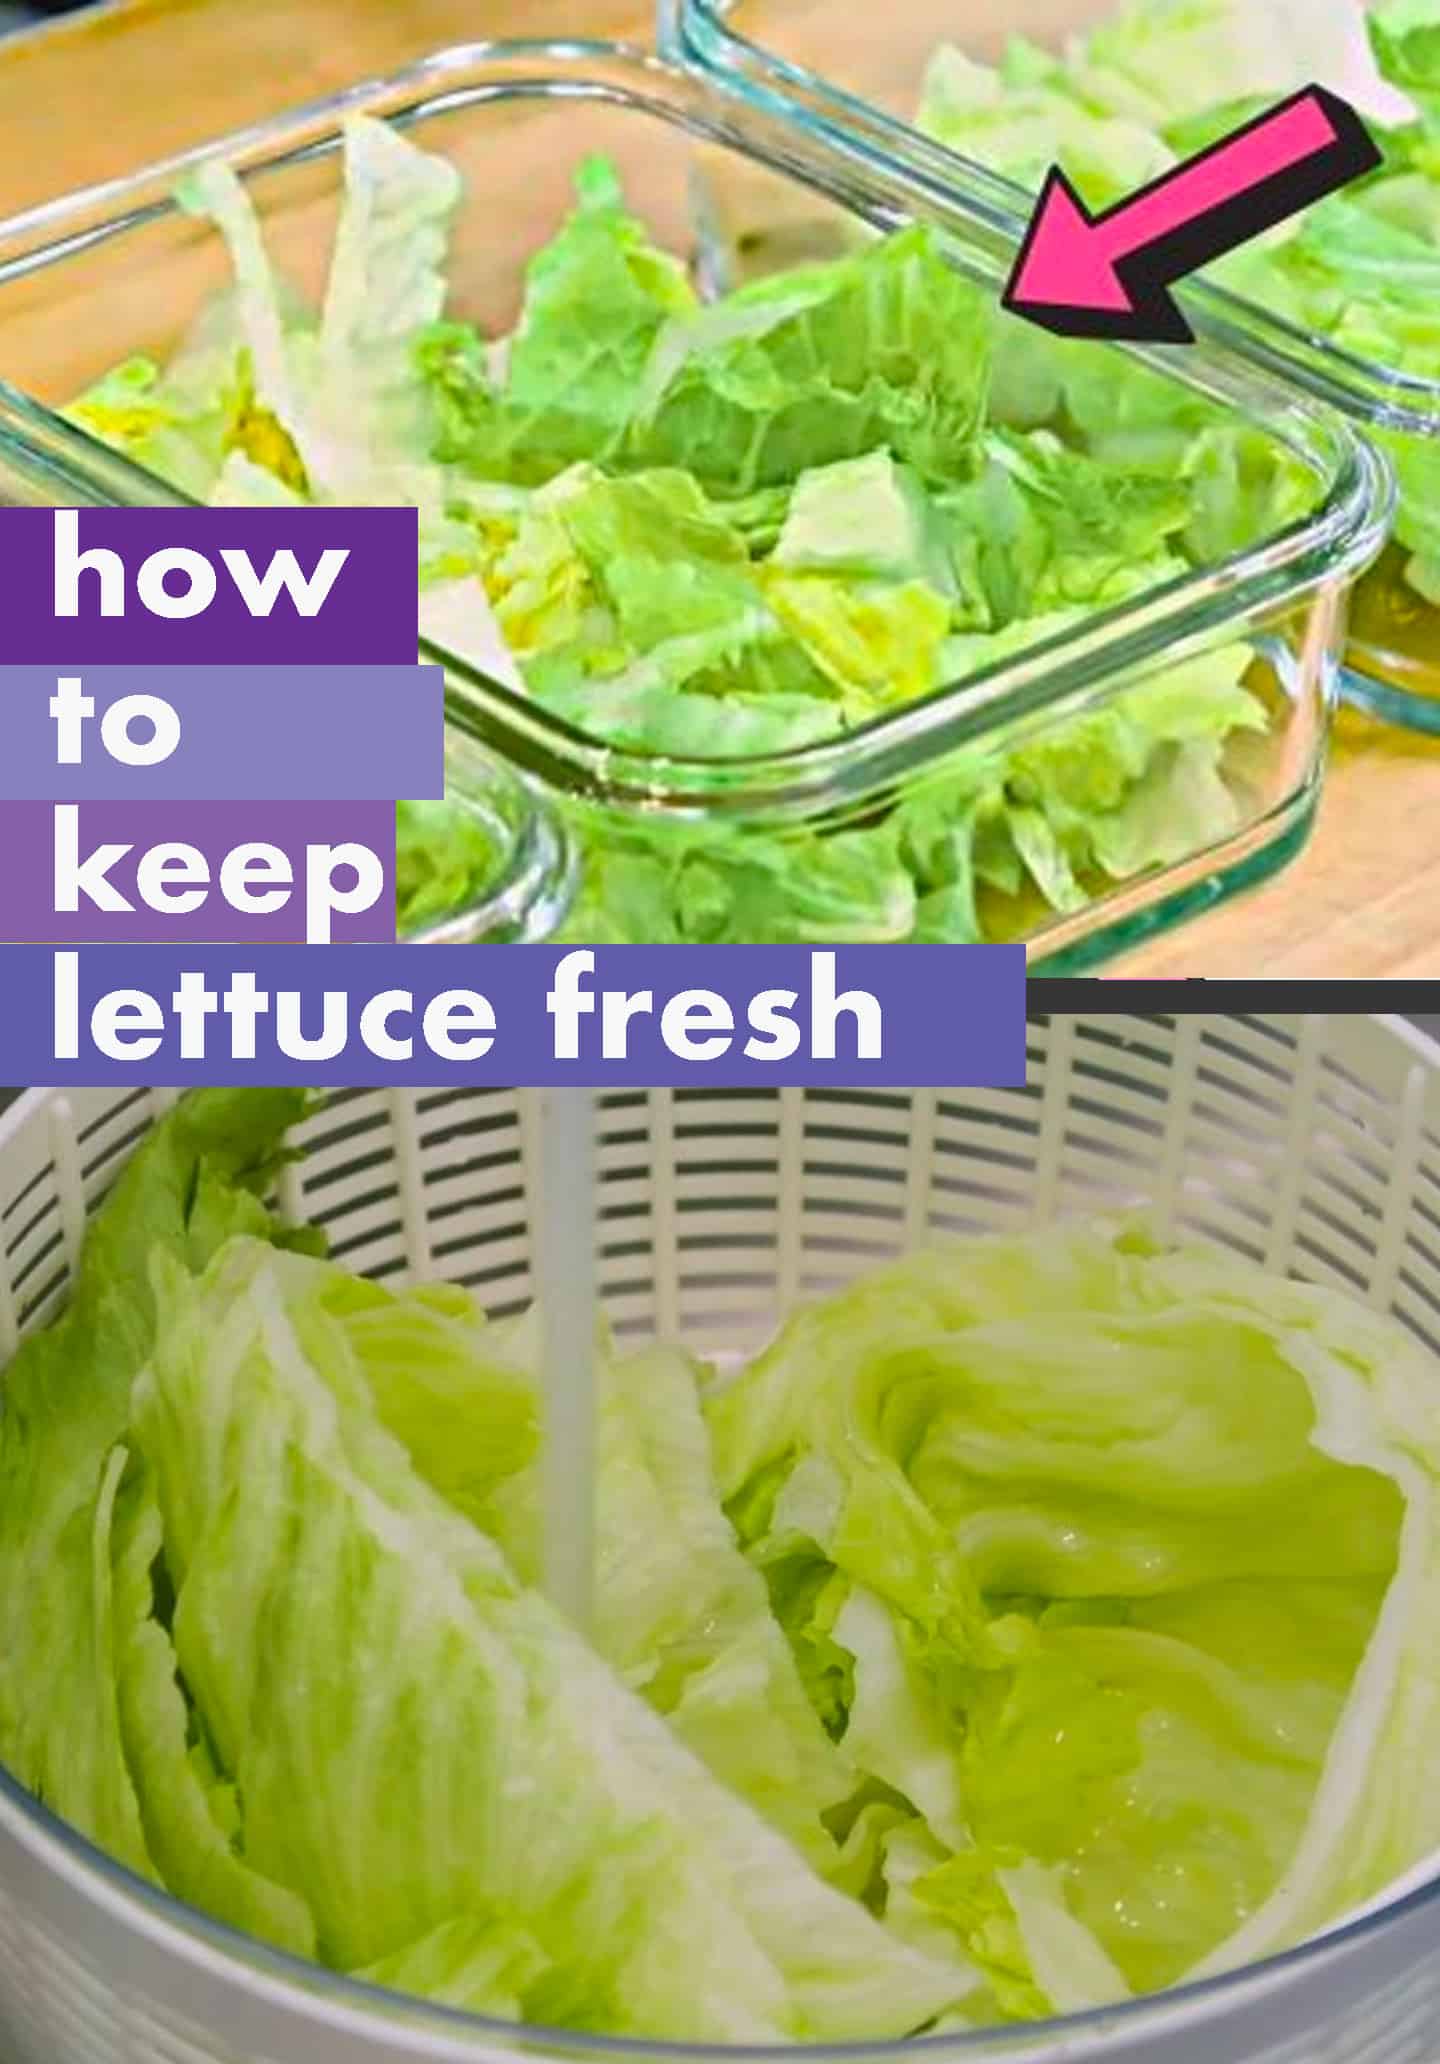 How To Keep Lettuce Fresh for a Week